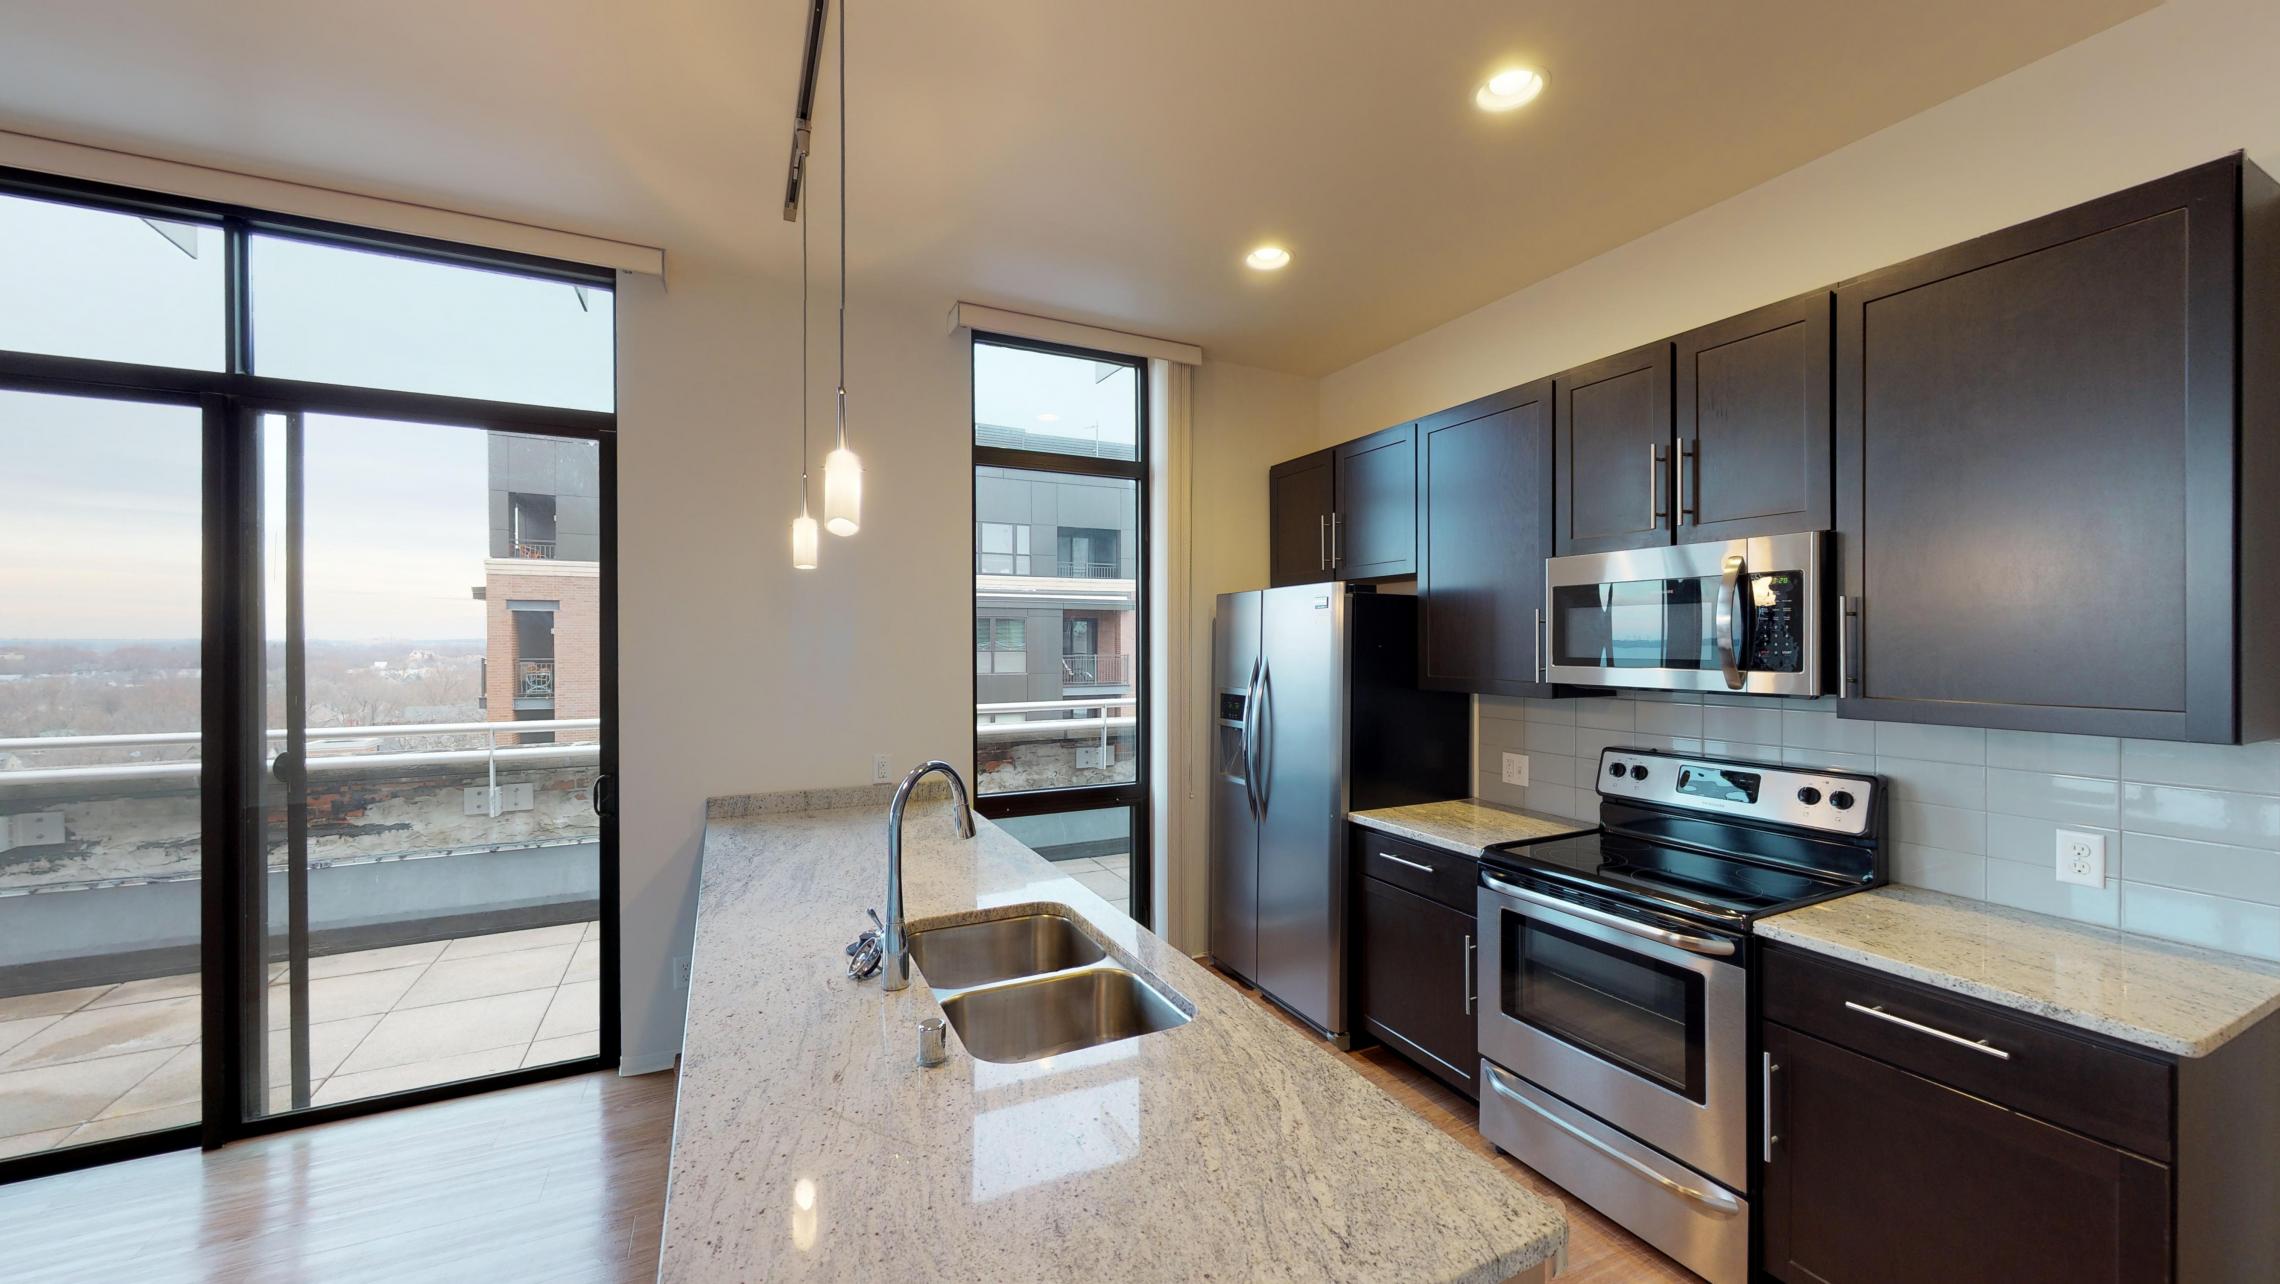 Capitol-Hill-Apartment-501-Two-Bedroom-Corner-Terrace-Lake-Capitol-Square-Downtown-Madison-Modern-Design-Lifestyle-Upscale-Luxury-Cats-Views-City-Bathroom-Storage-Kitchen